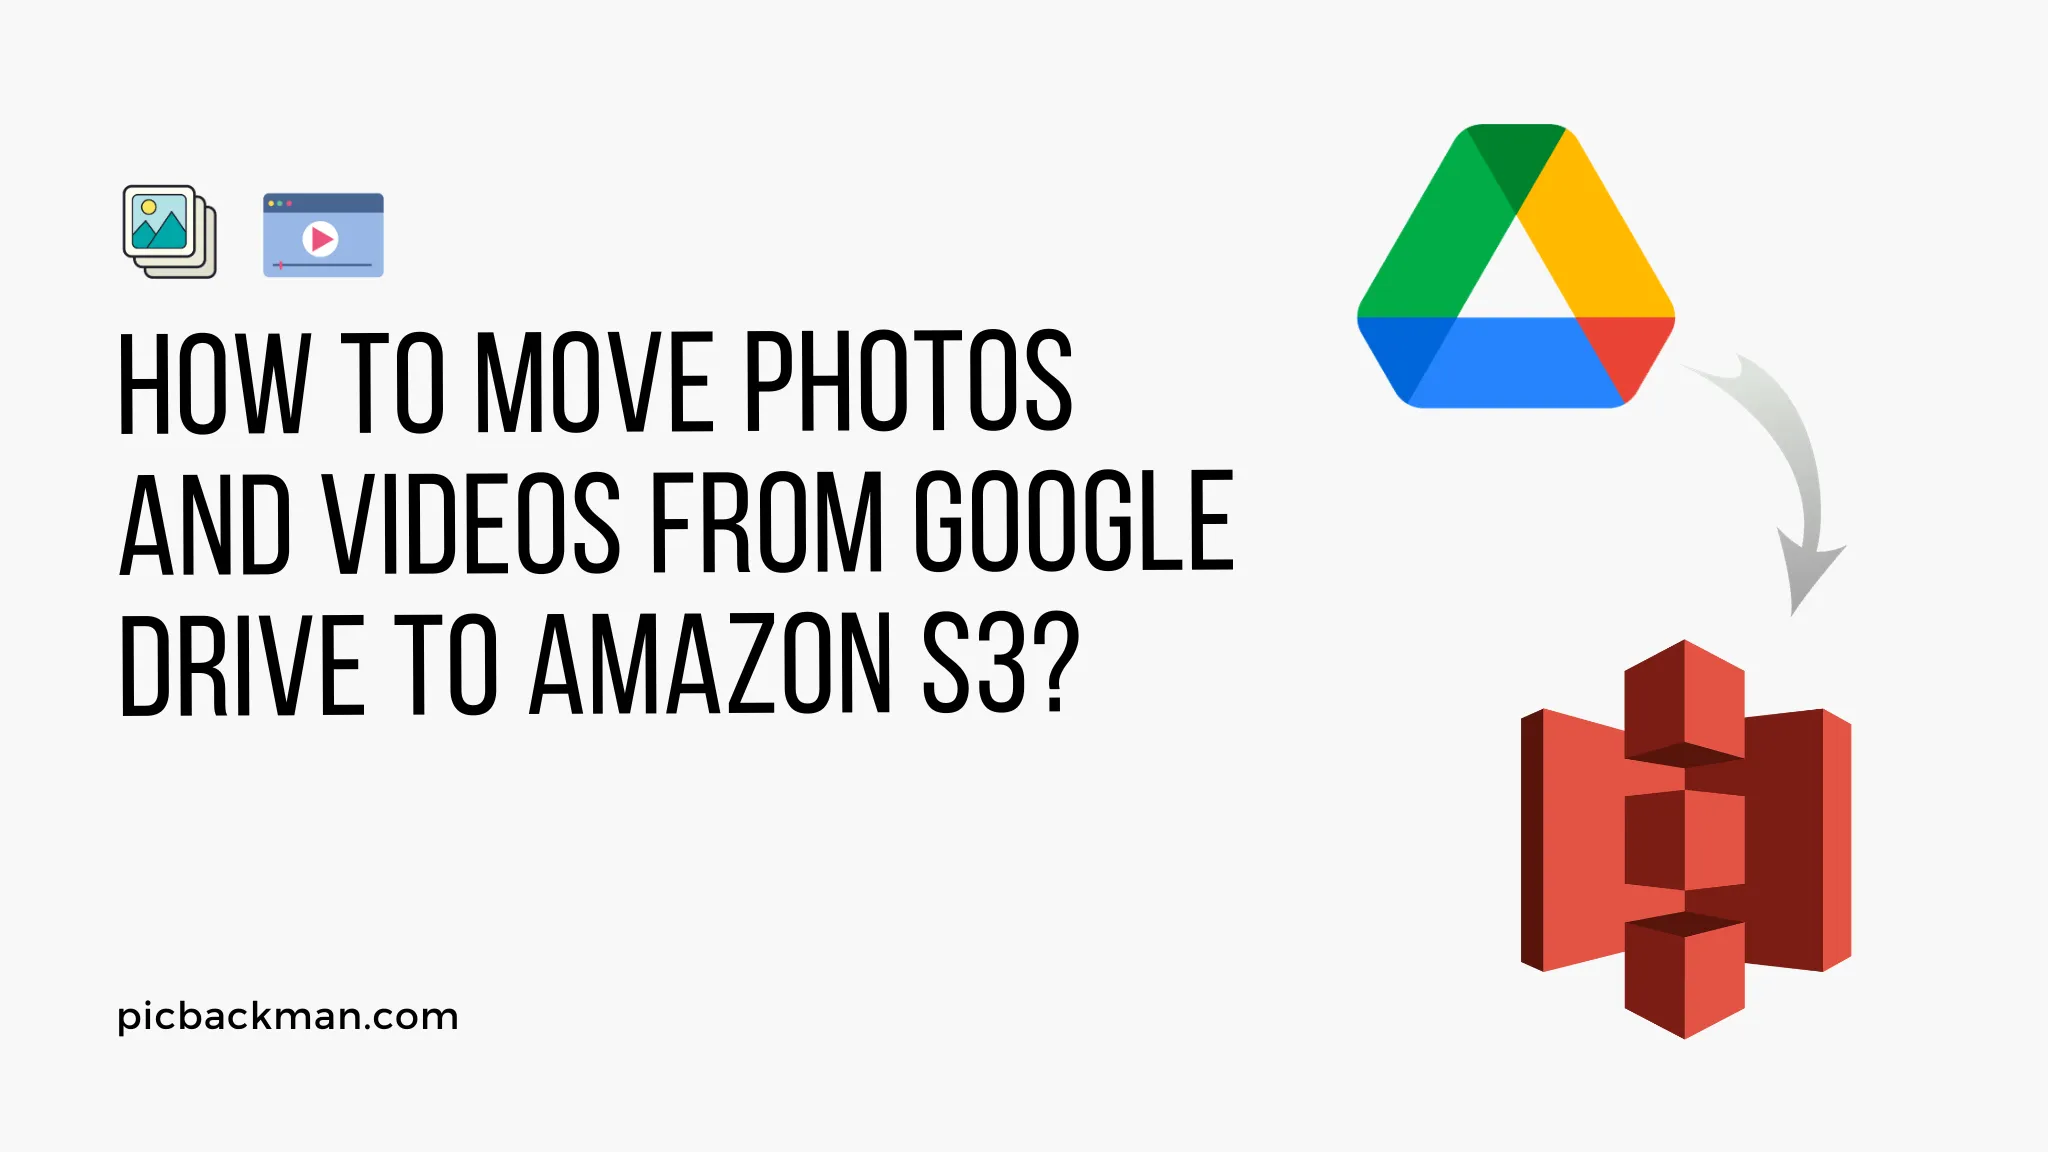 How to Move Photos and Videos from Google Drive to Amazon S3?